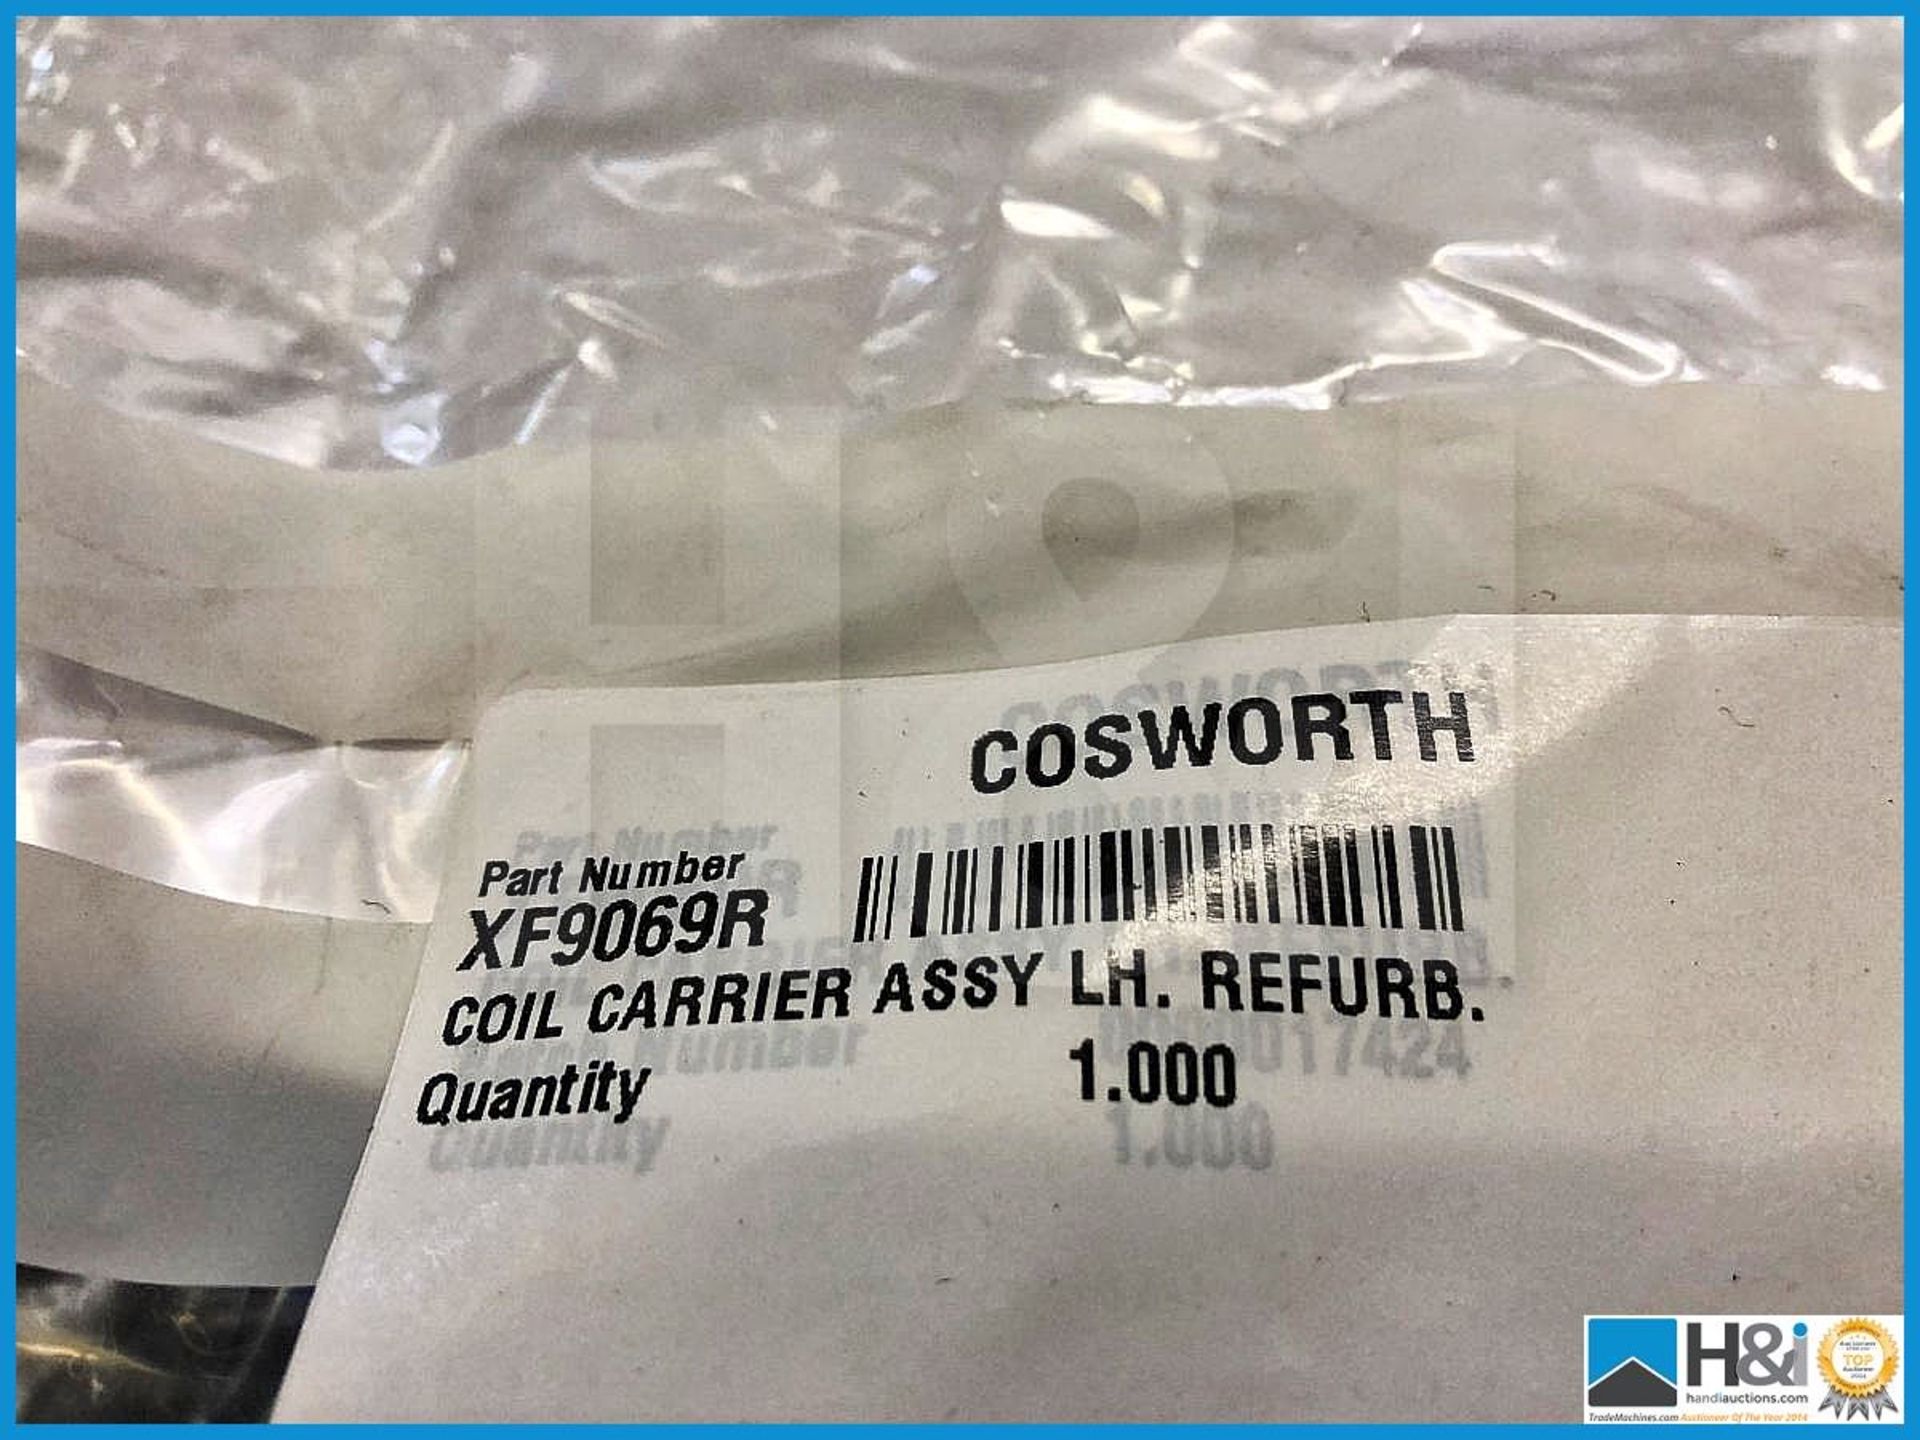 8 x Cosworth XF IndyCar Coil Carrier Assembly LH. Refurbished. Code XF9069R RRP GBP 6816 - Image 3 of 3